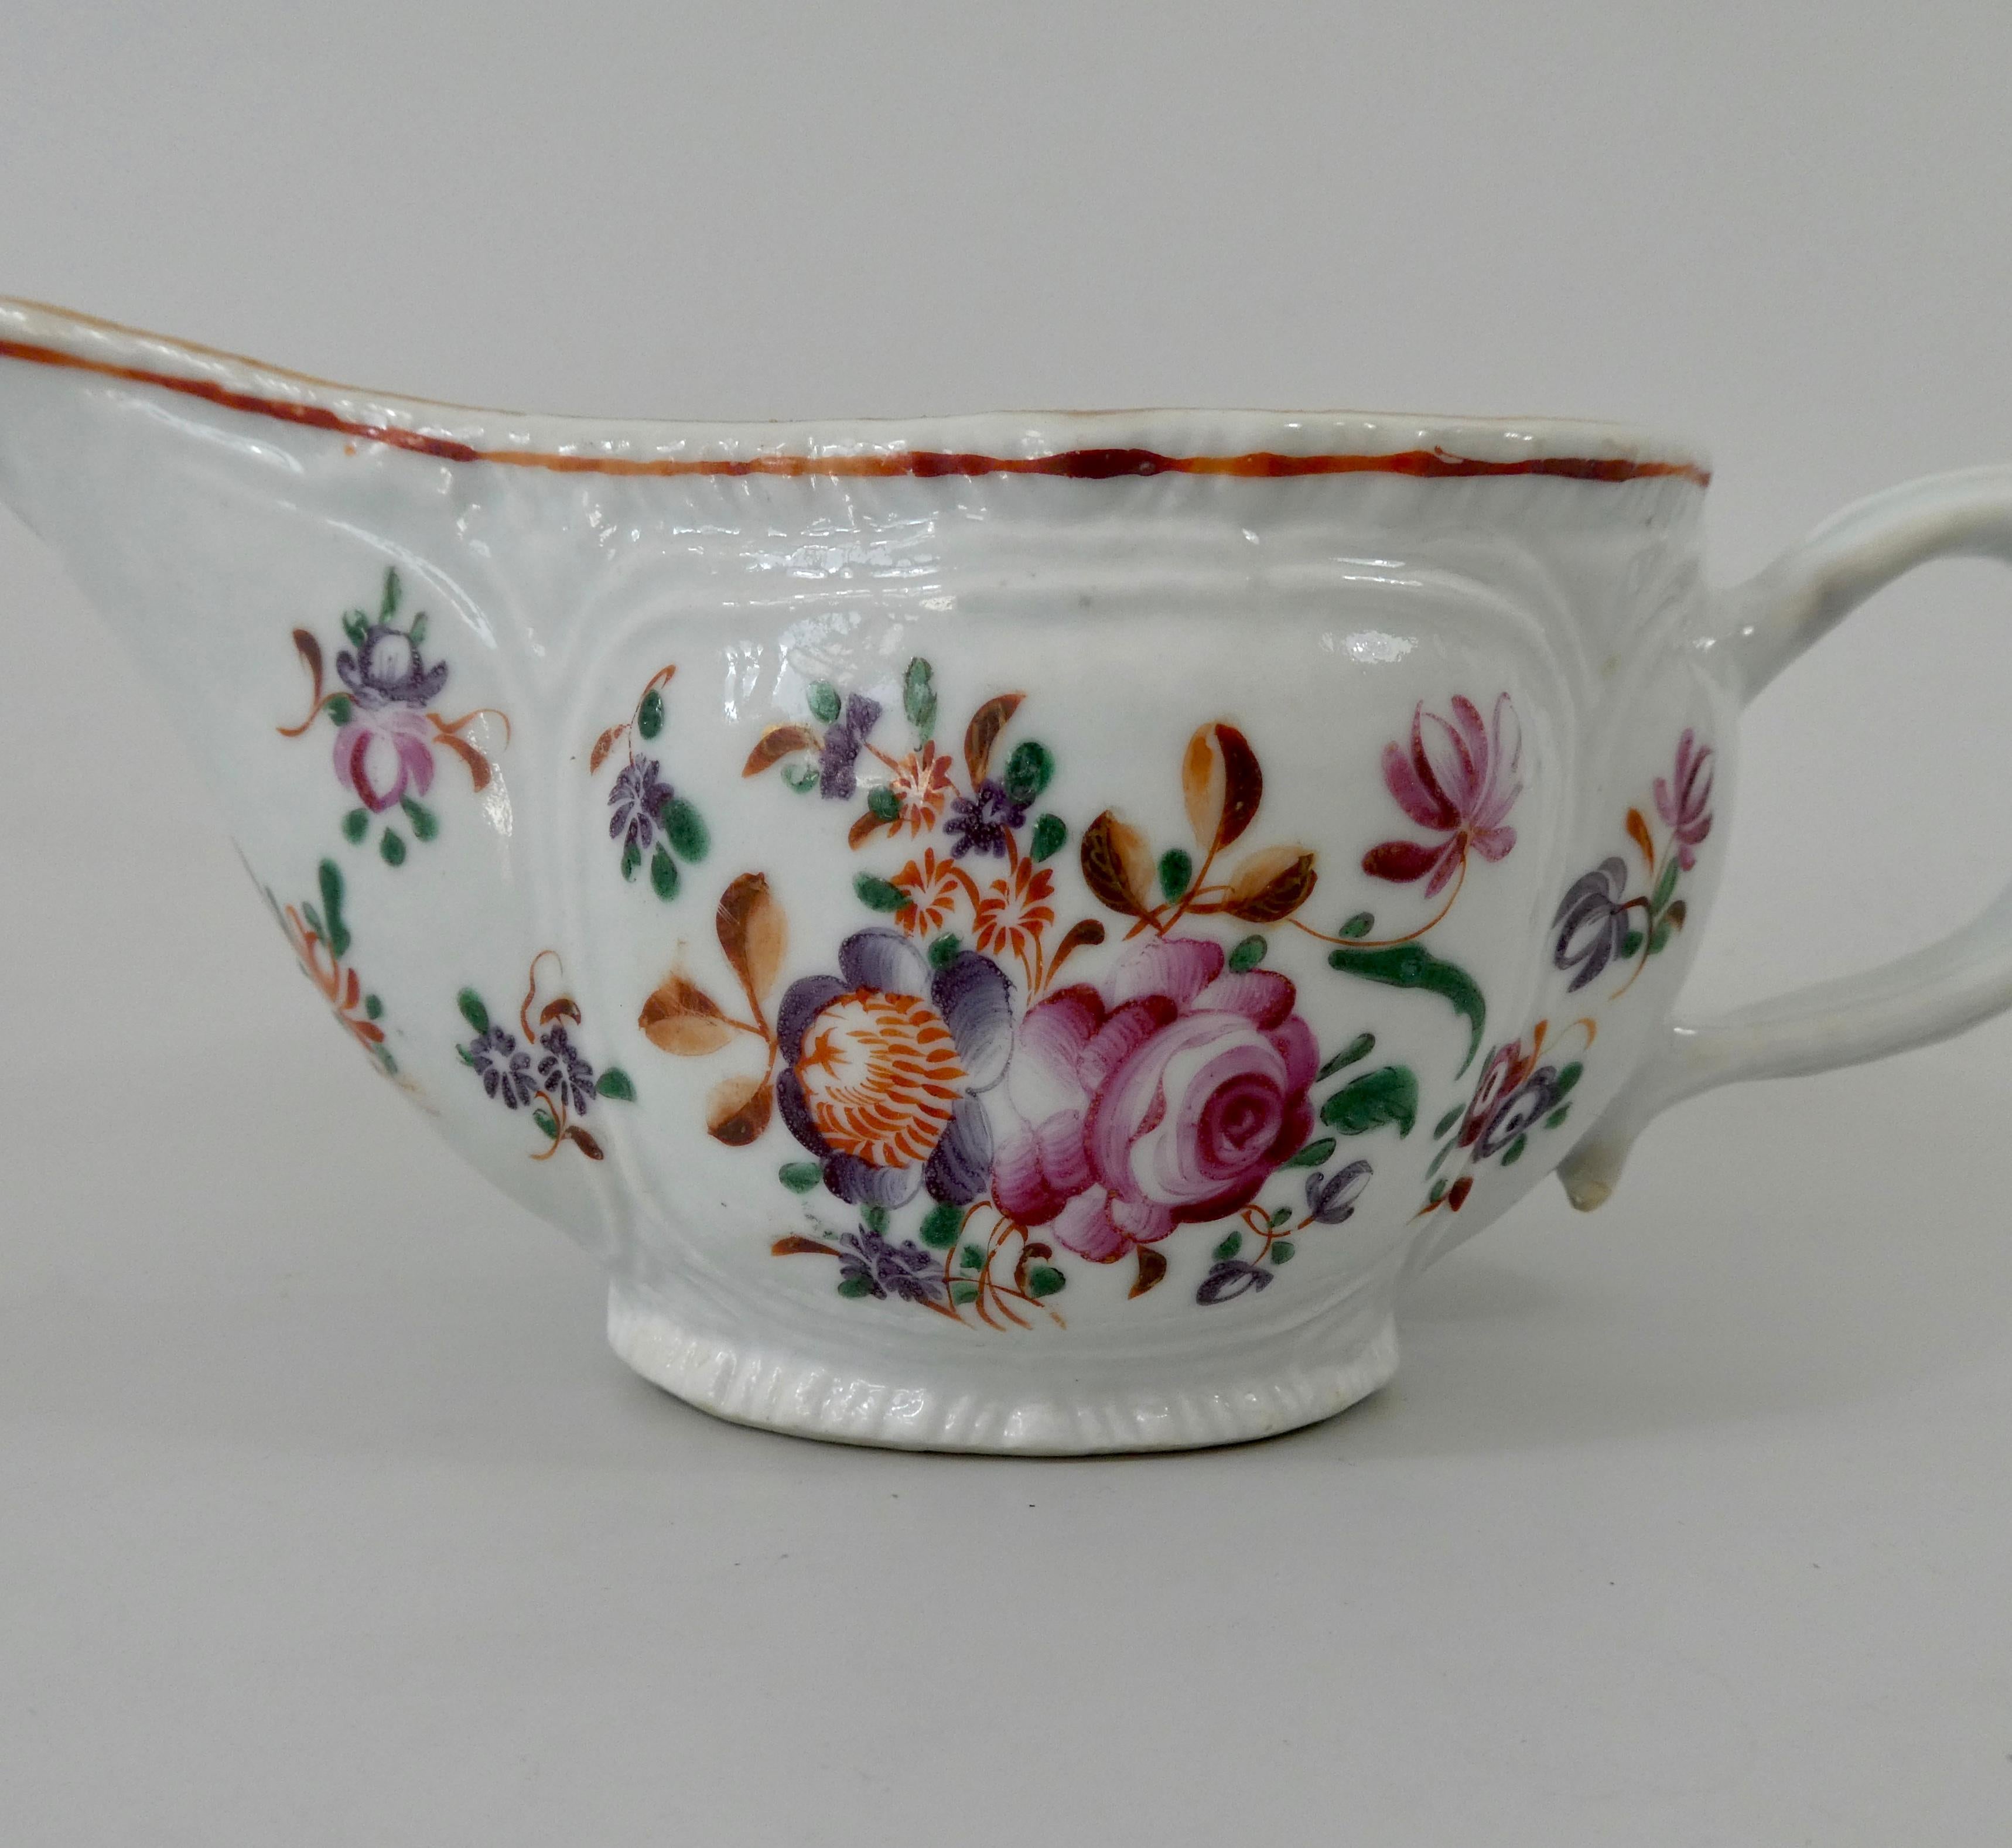 Chinese porcelain sauceboat, circa 1760, Qianlong Period. The silver shaped sauceboat, with moulded panels, containing sprays of flowers, painted in fencai, or famille rose enamels. Having a moulded loop handle.
Measures: Length 16.5 cm, 6